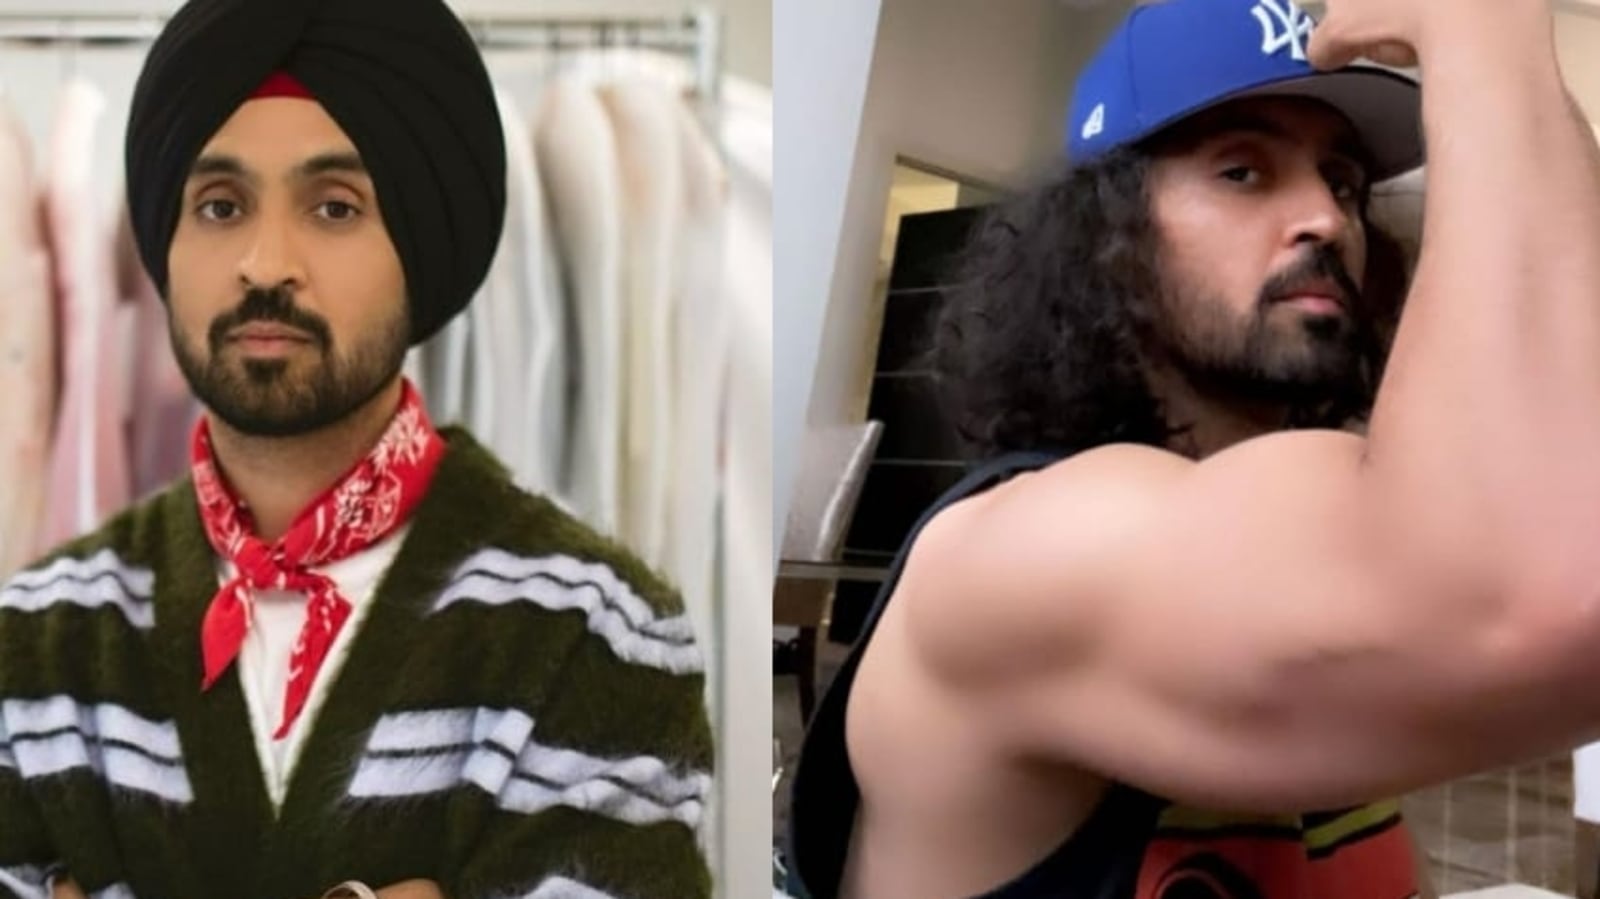 English Picturexxx Video - Diljit Dosanjh says 'I'm sexy and I know it'; fans react to photo of his  biceps | Bollywood - Hindustan Times